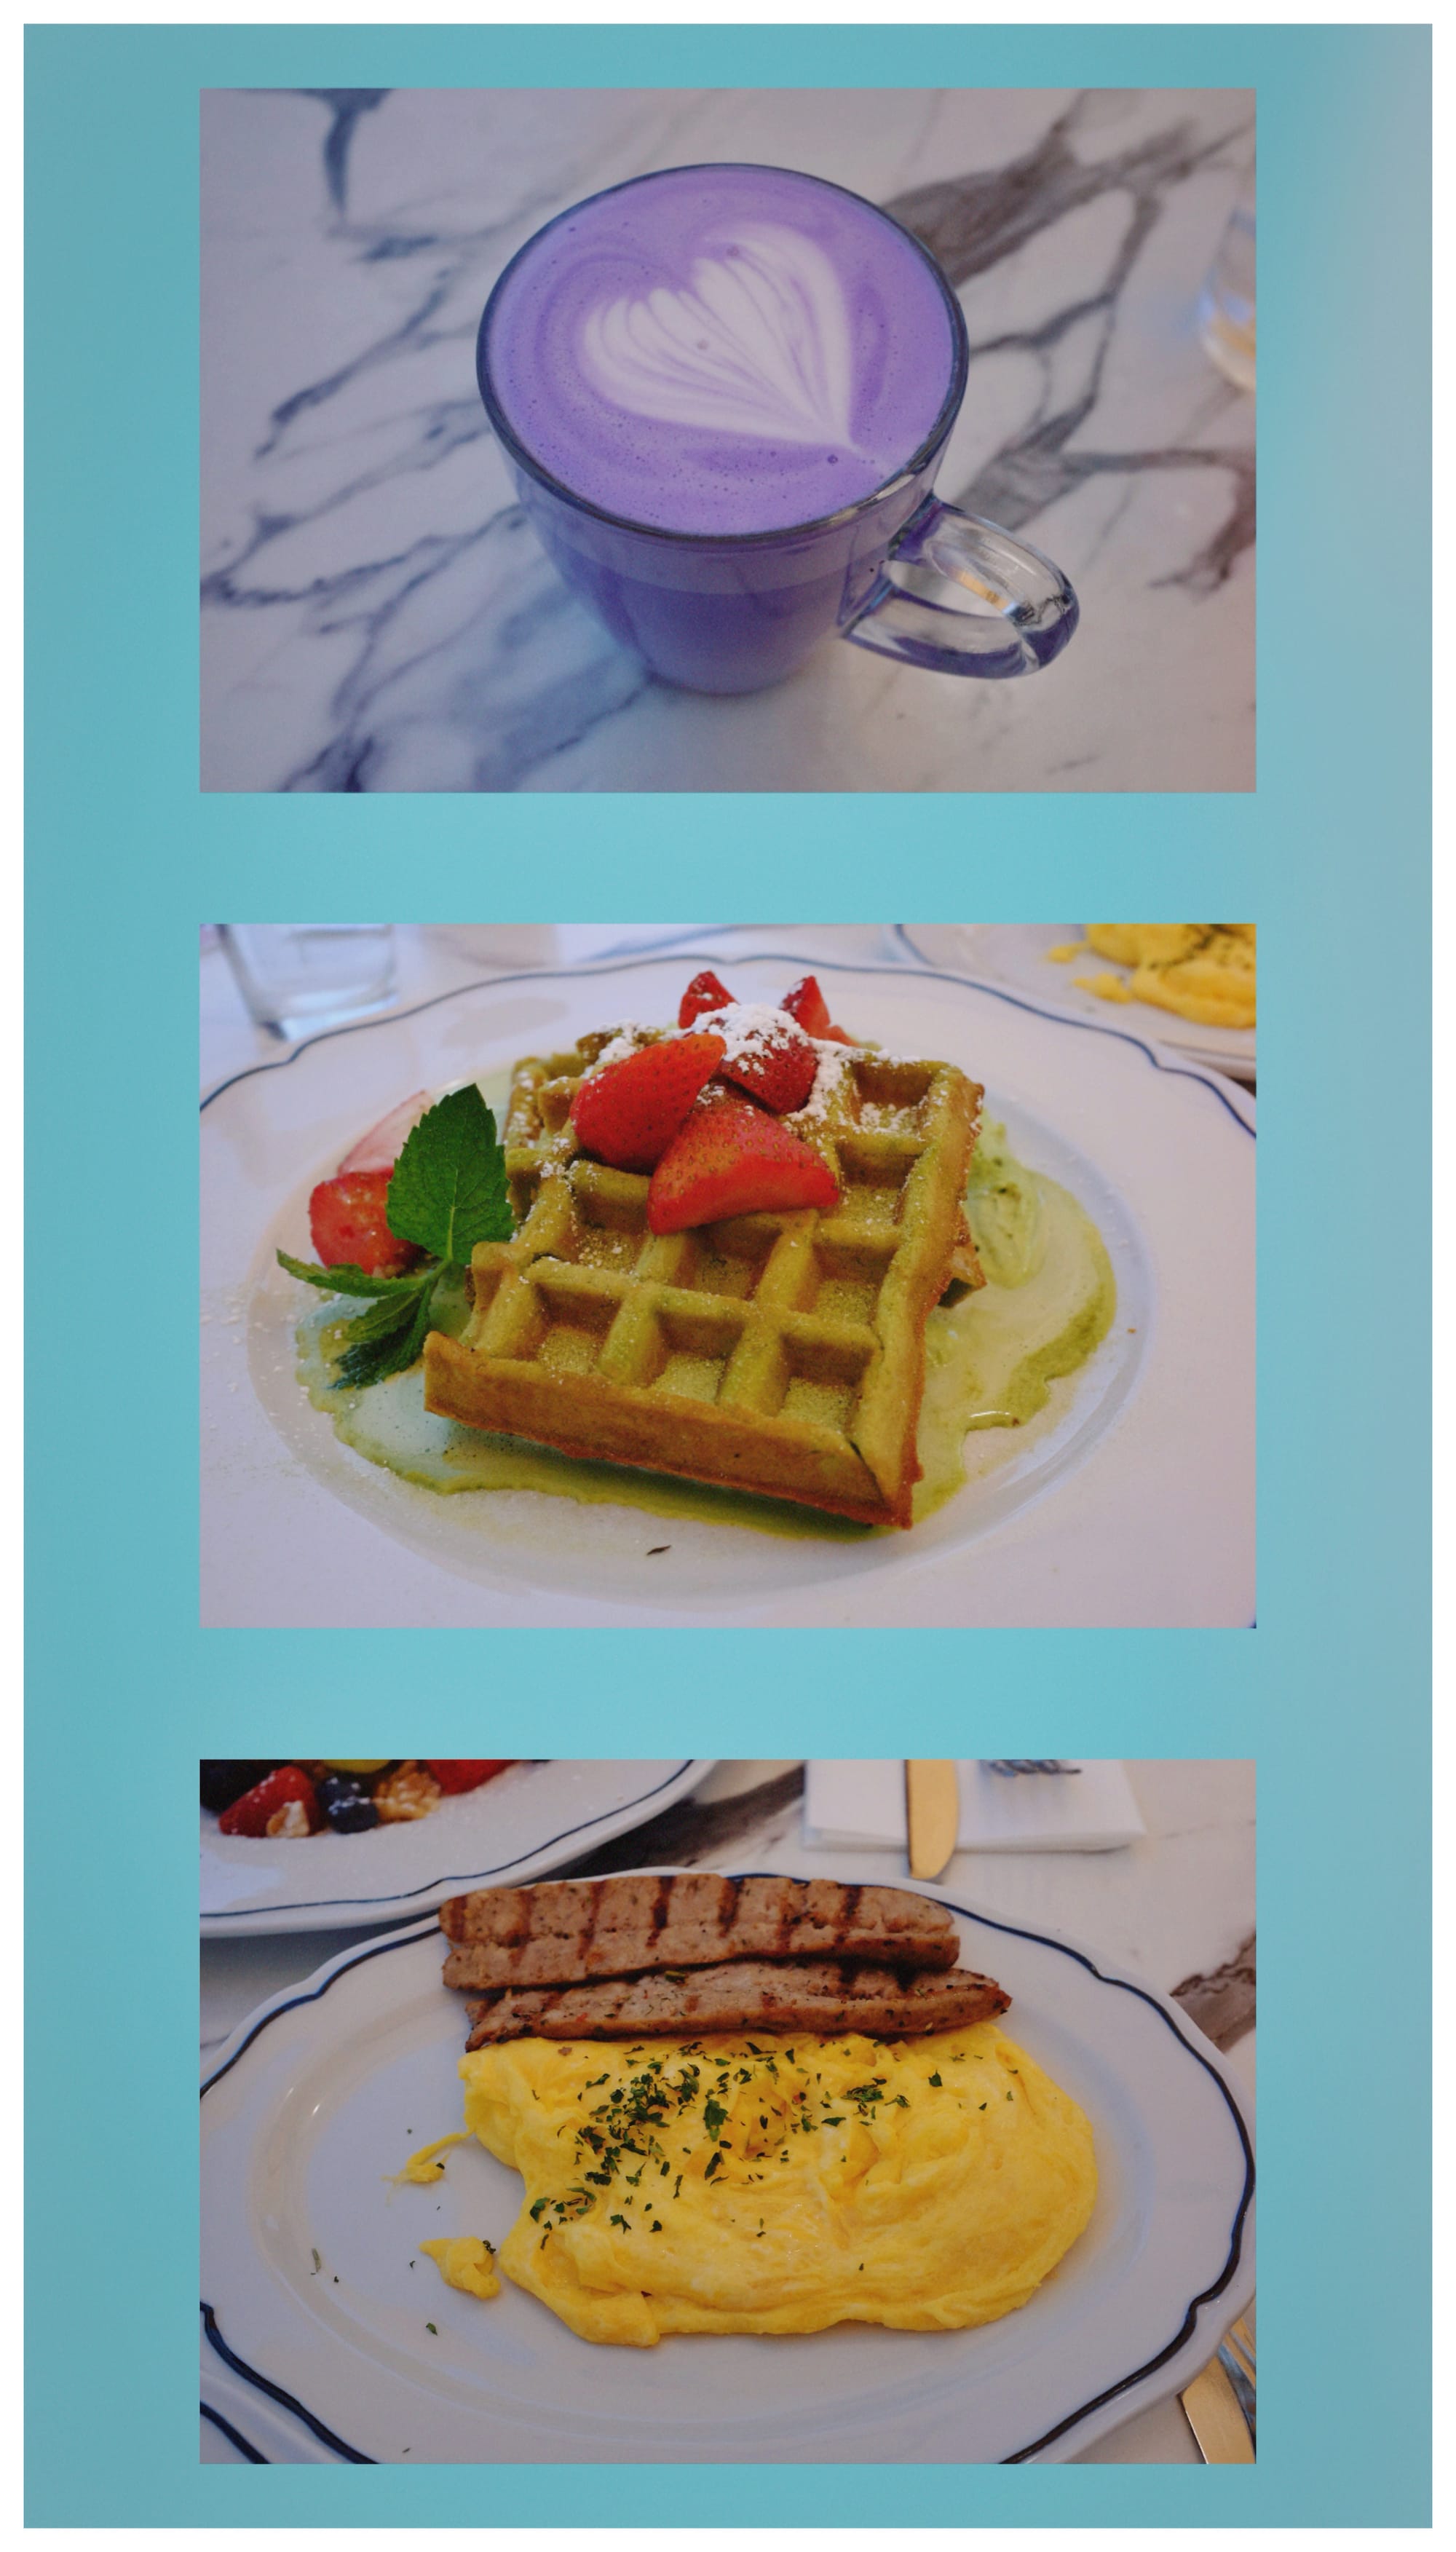 Ordered brunch items in a 3-photo collage: pastel purple ube latte in a glass cup (top), pale green matcha moffle sitting on a bed of matcha whipped cream, topped with strawberry halves (middle), and 2 scrambled eggs and a split pork sausage (bottom)